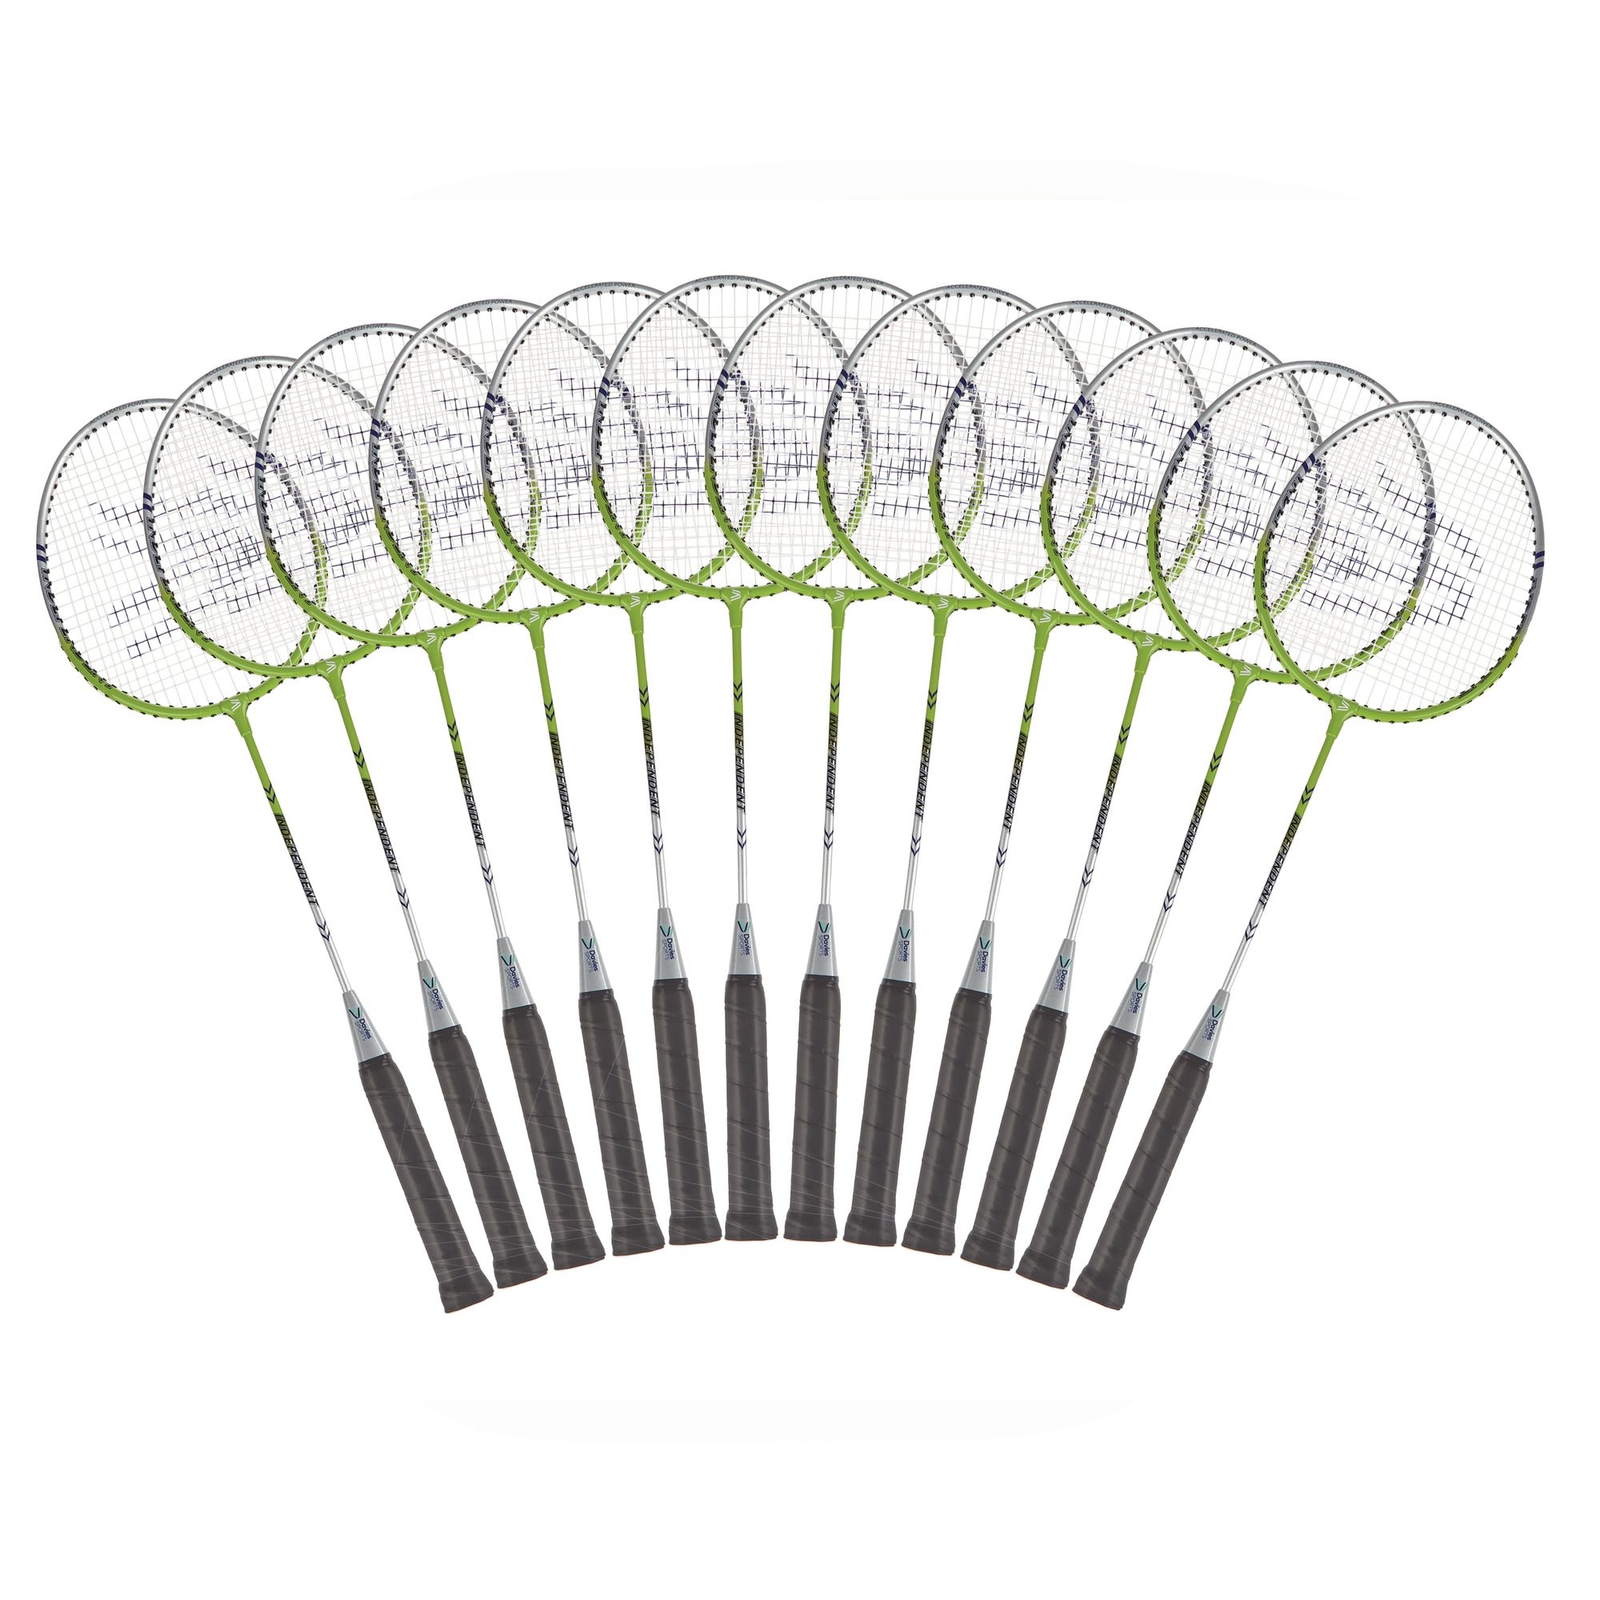 Davies Sports Independent Racquet - Pack of 12